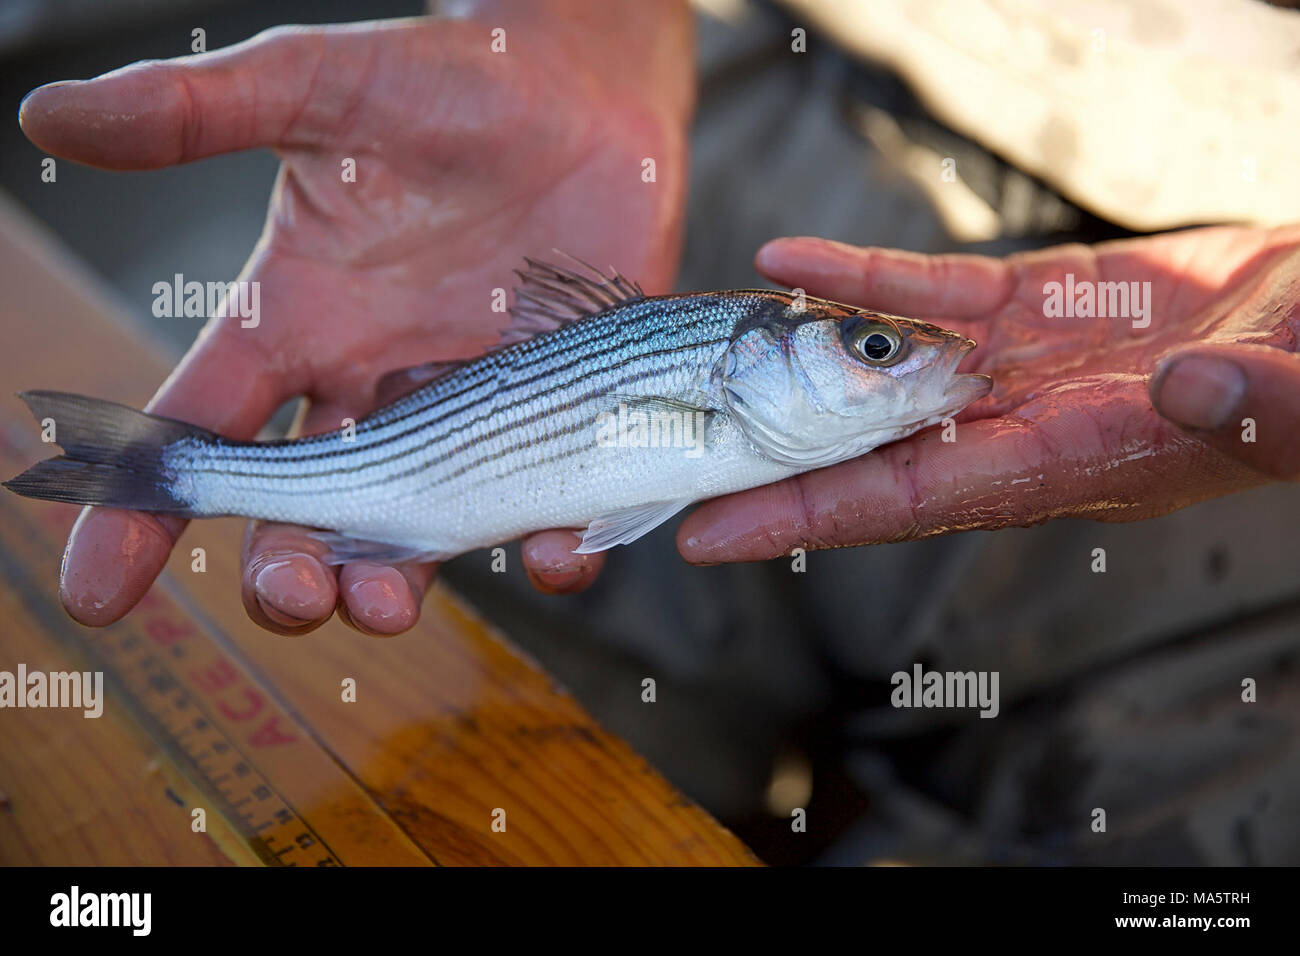 Striped bass. Striped bass captured and returned to the San Joaquin River near Tracy, California during U.S. Fish and Wildlife Service white sturgeon monitoring operations Nov. 28, 2017. Stock Photo